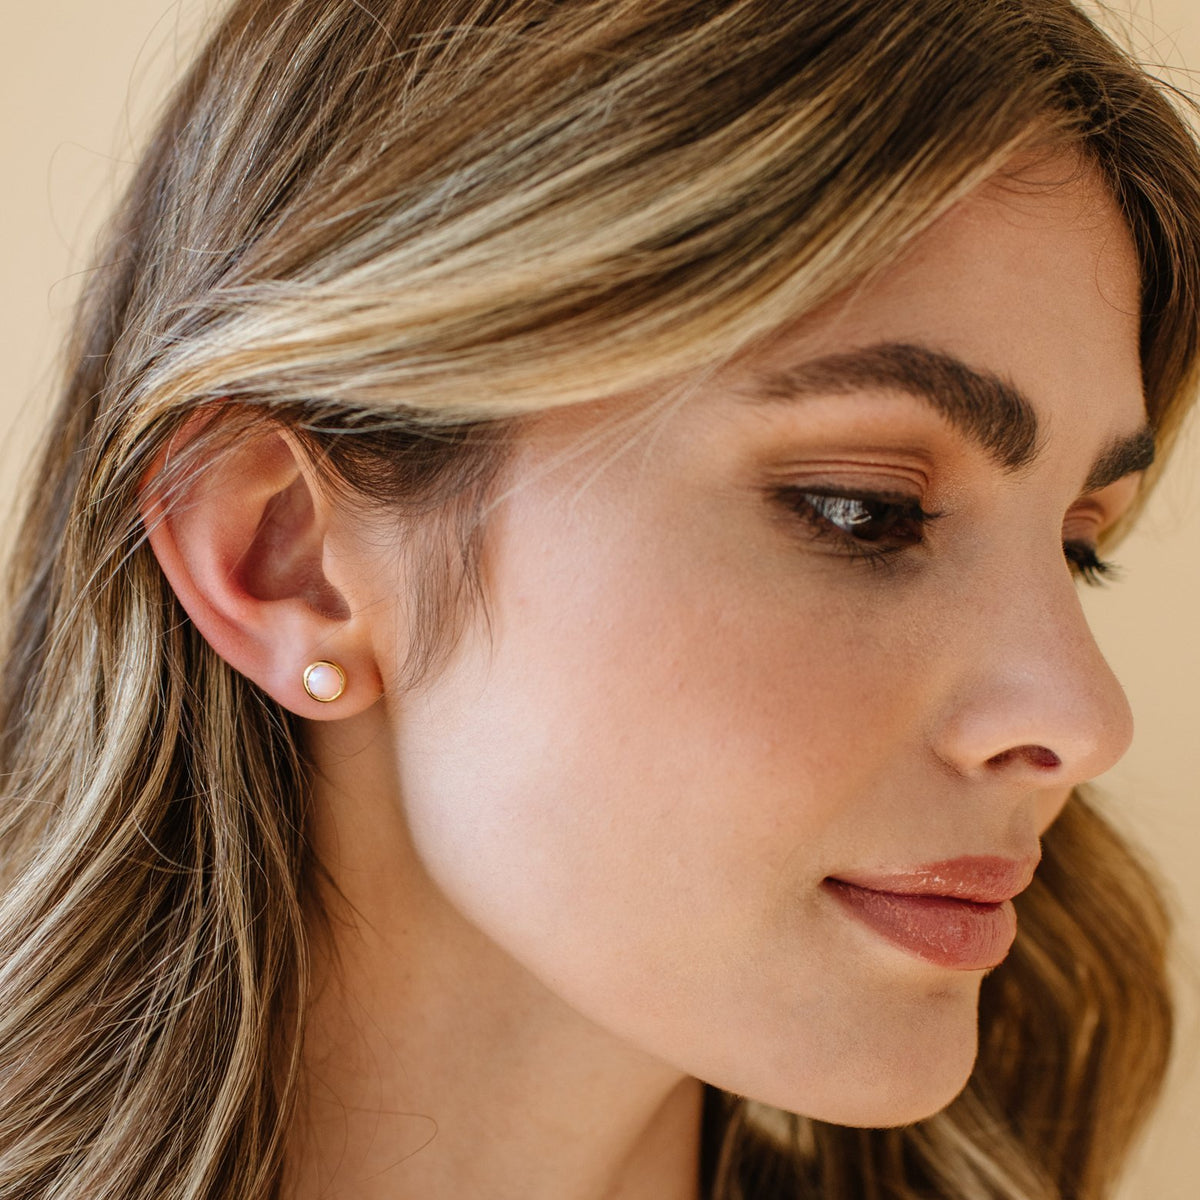 DAINTY LEGACY STUDS - PINK OPAL &amp; GOLD - SO PRETTY CARA COTTER